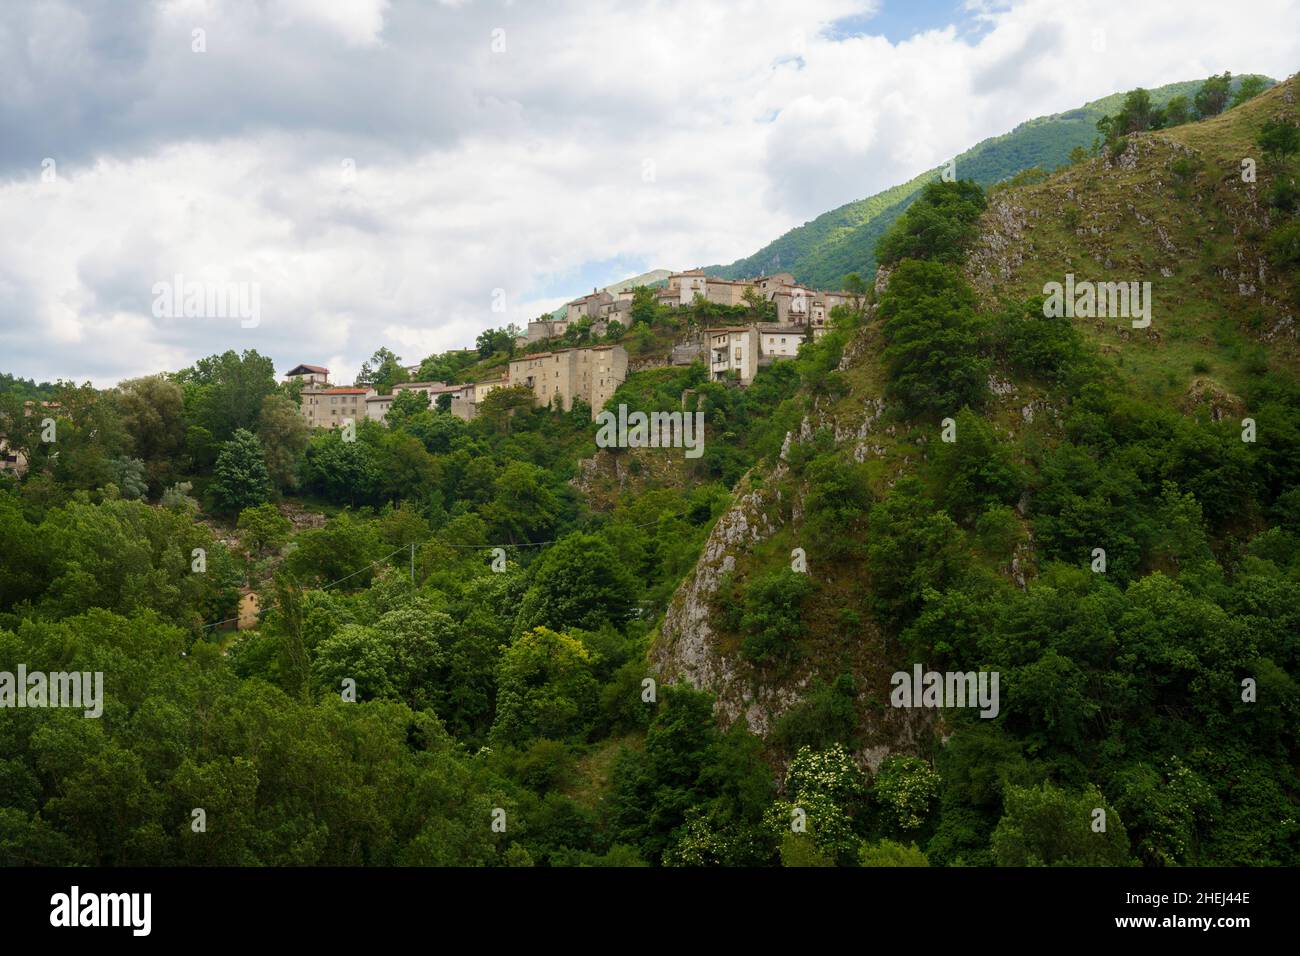 Mountain landscape along the road of Gole del Sagittario, famous canyon in Abruzzo, Italy, L Aquila province. View of Villalago, old village Stock Photo